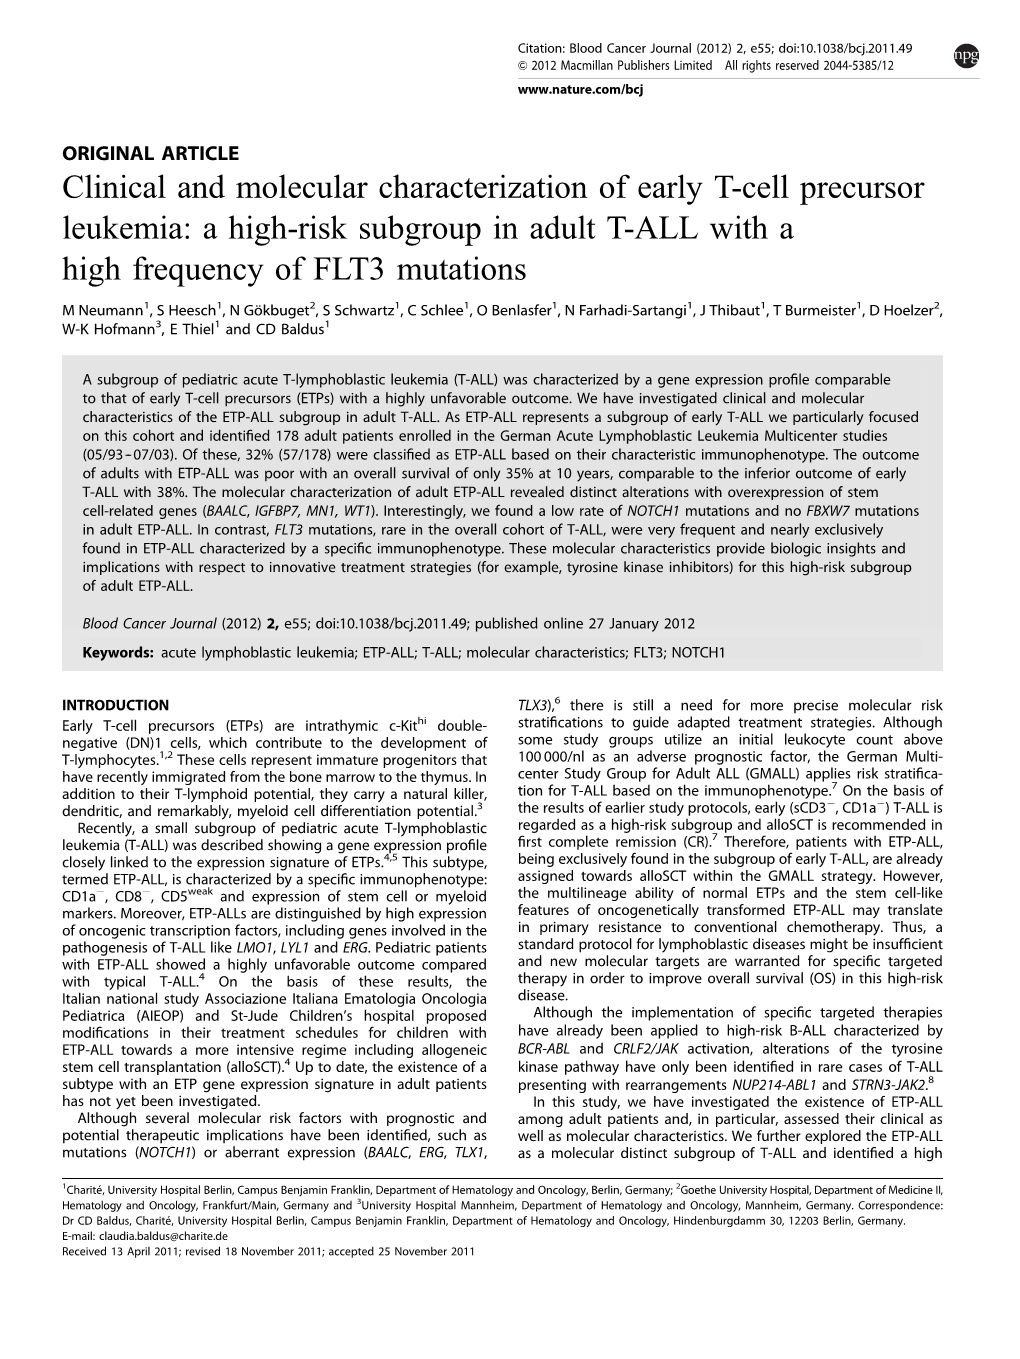 Clinical and Molecular Characterization of Early T-Cell Precursor Leukemia: a High-Risk Subgroup in Adult T-ALL with a High Frequency of FLT3 Mutations